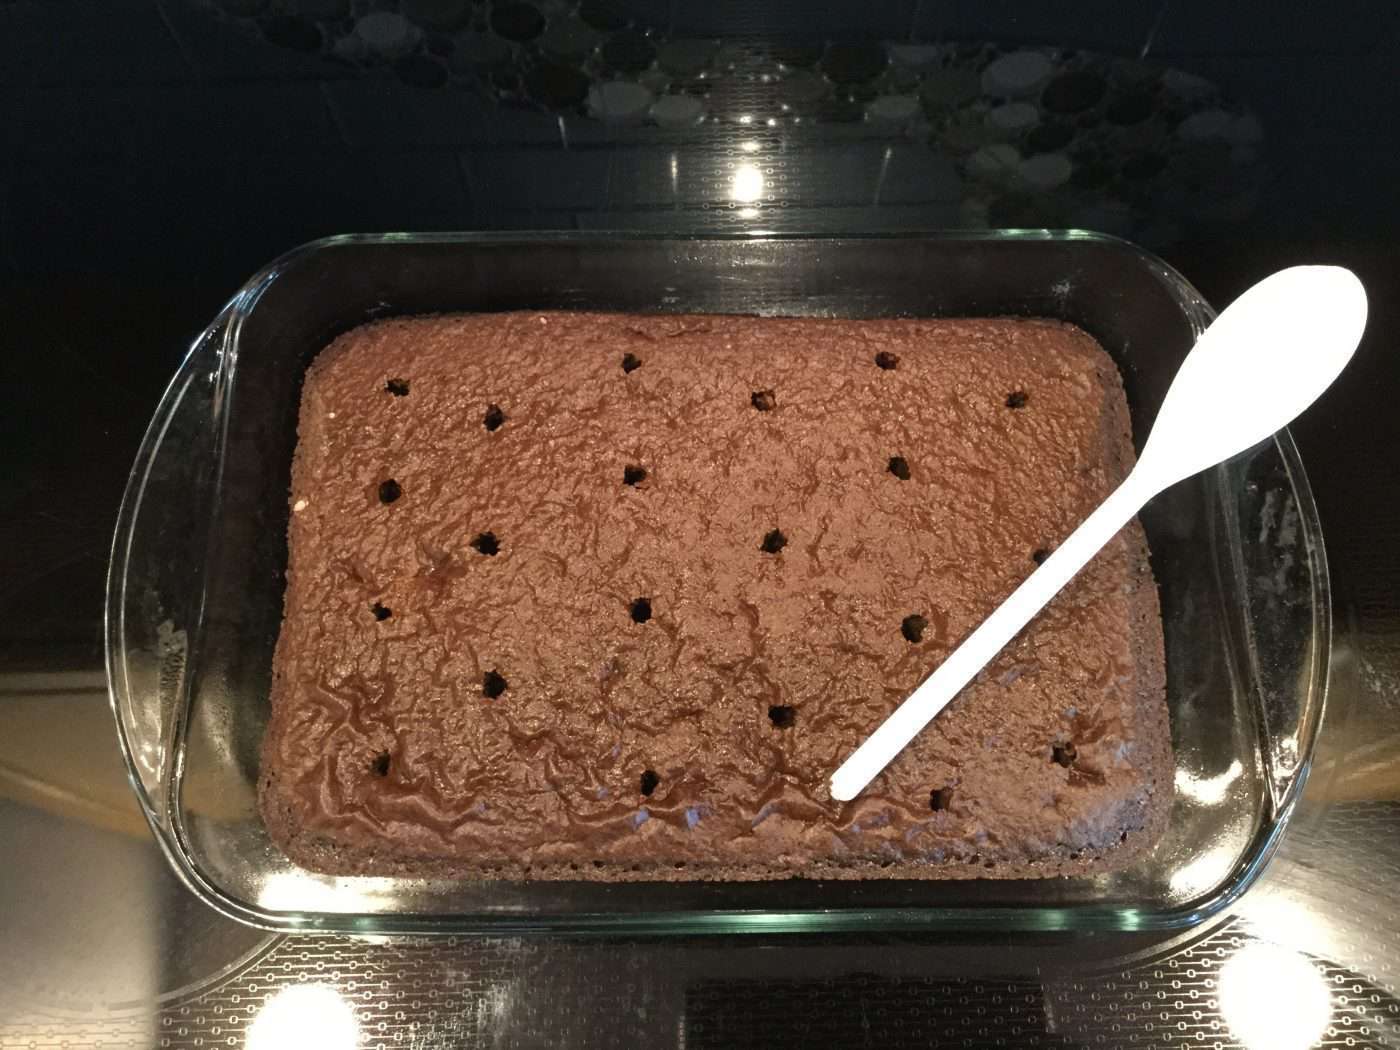 Once completely cooled, poke holes in your cake. (I use the back of a spoon handle)